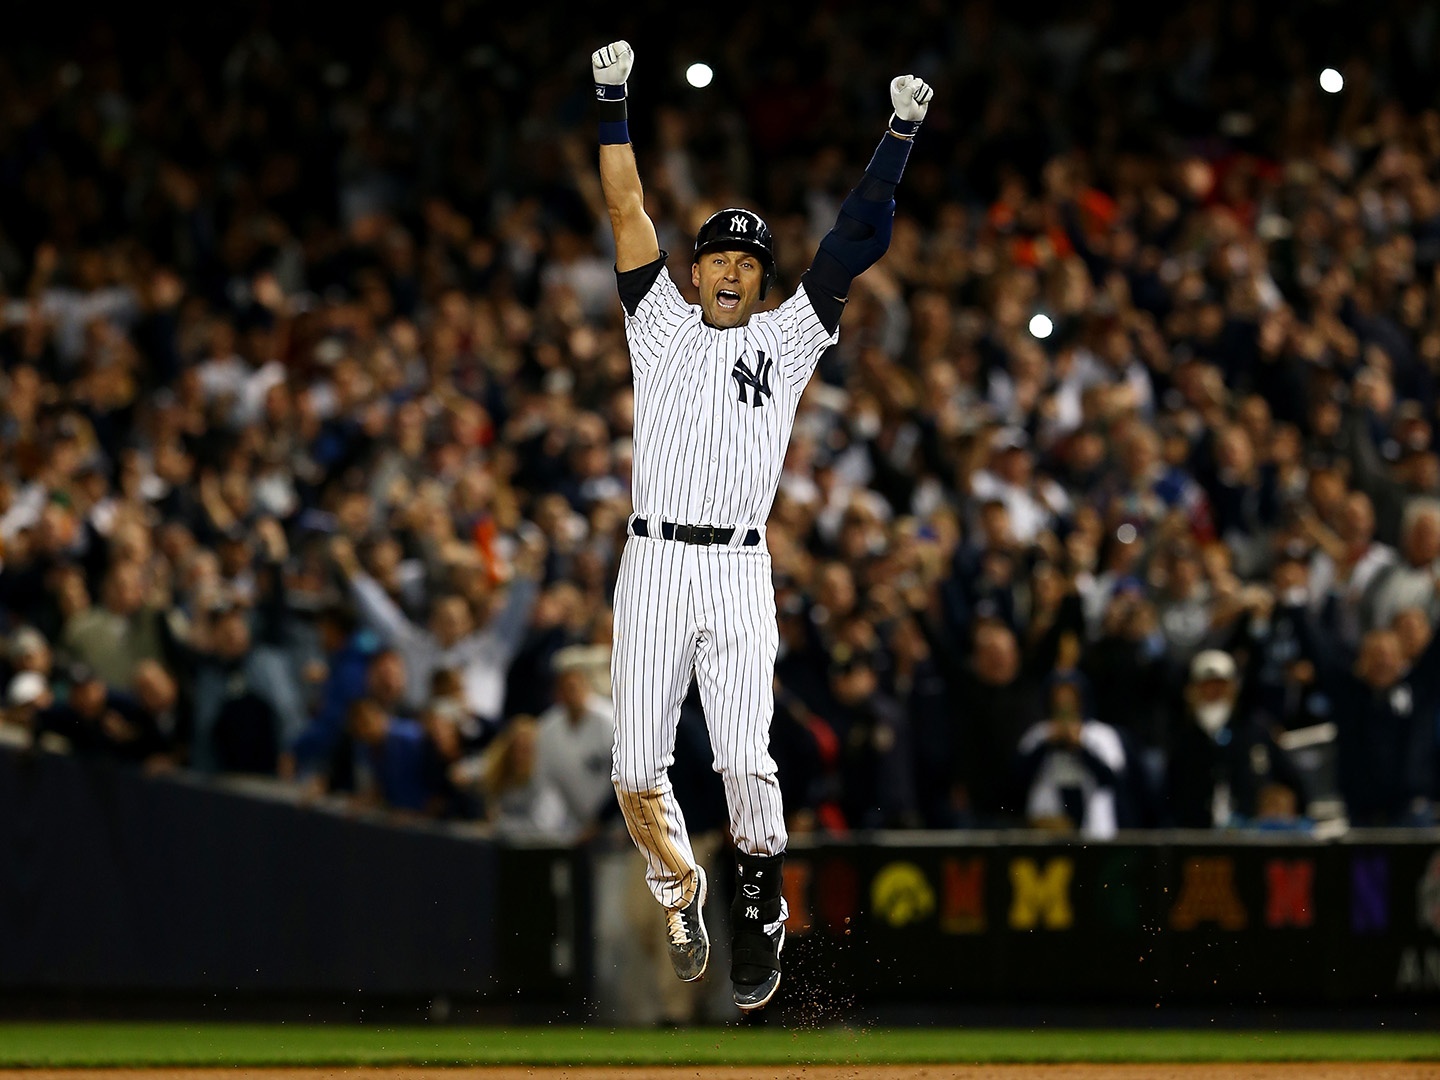 Where were you on the night of Derek Jeter's last home game